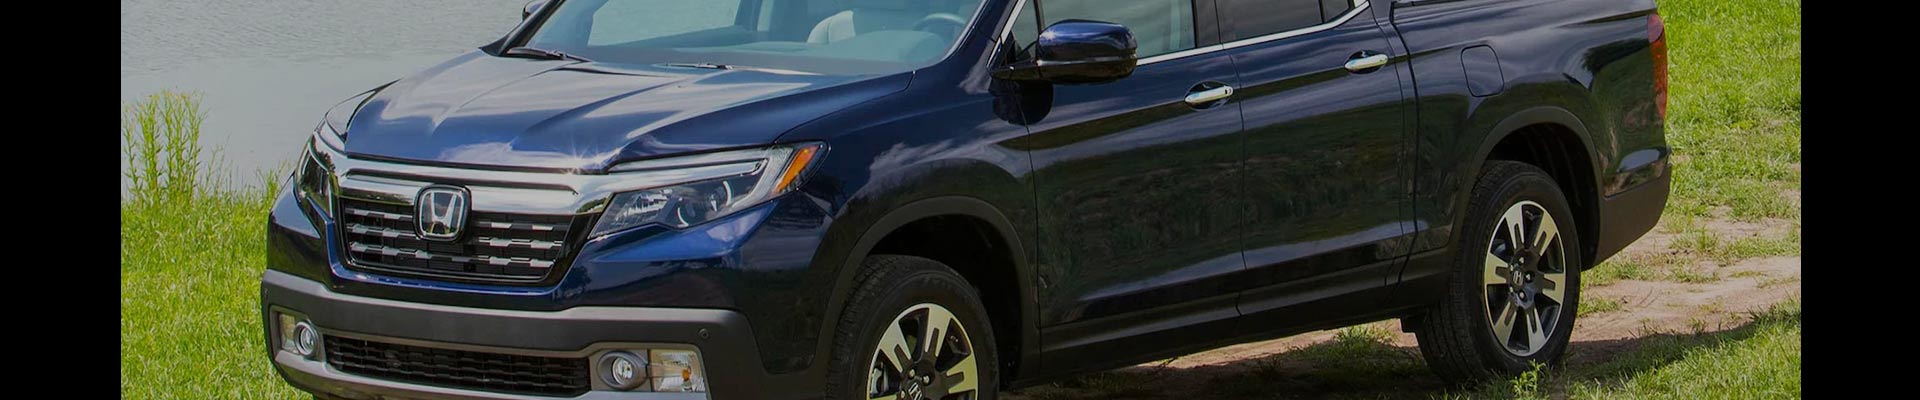 Shop Replacement and OEM 2019 Honda Ridgeline Parts with Discounted Price on the Net